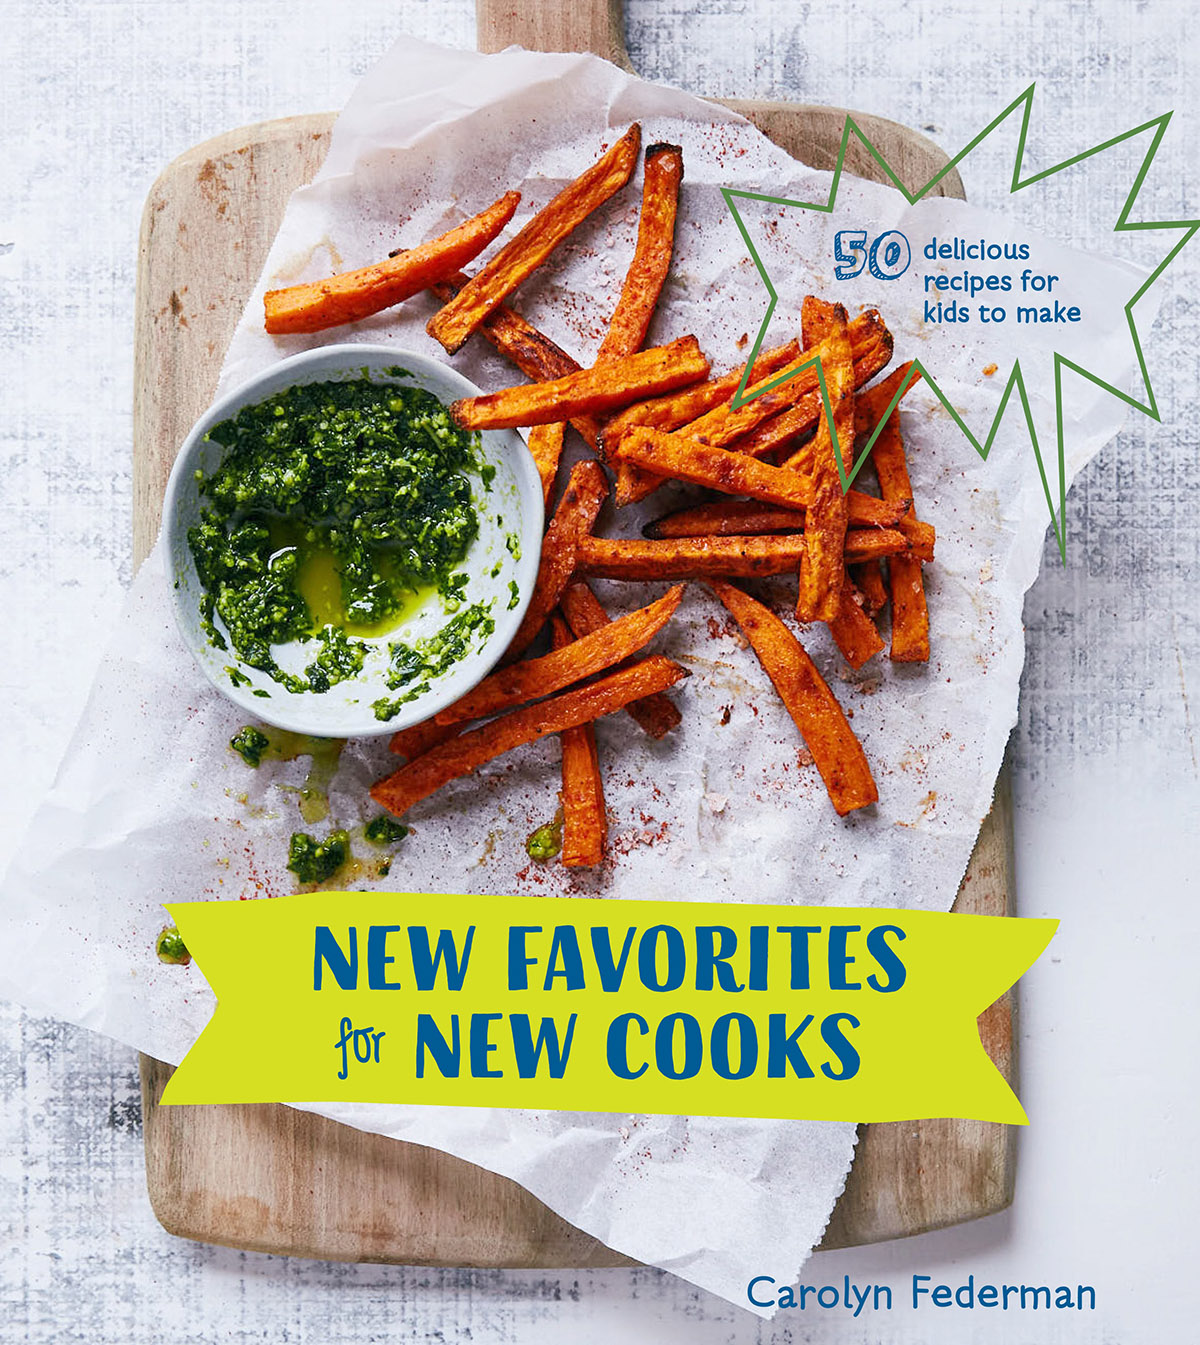 Cookbook Launch: New Favorites for New Cooks: 50 Delicious Recipes for Kids to Make by Carolyn Federman